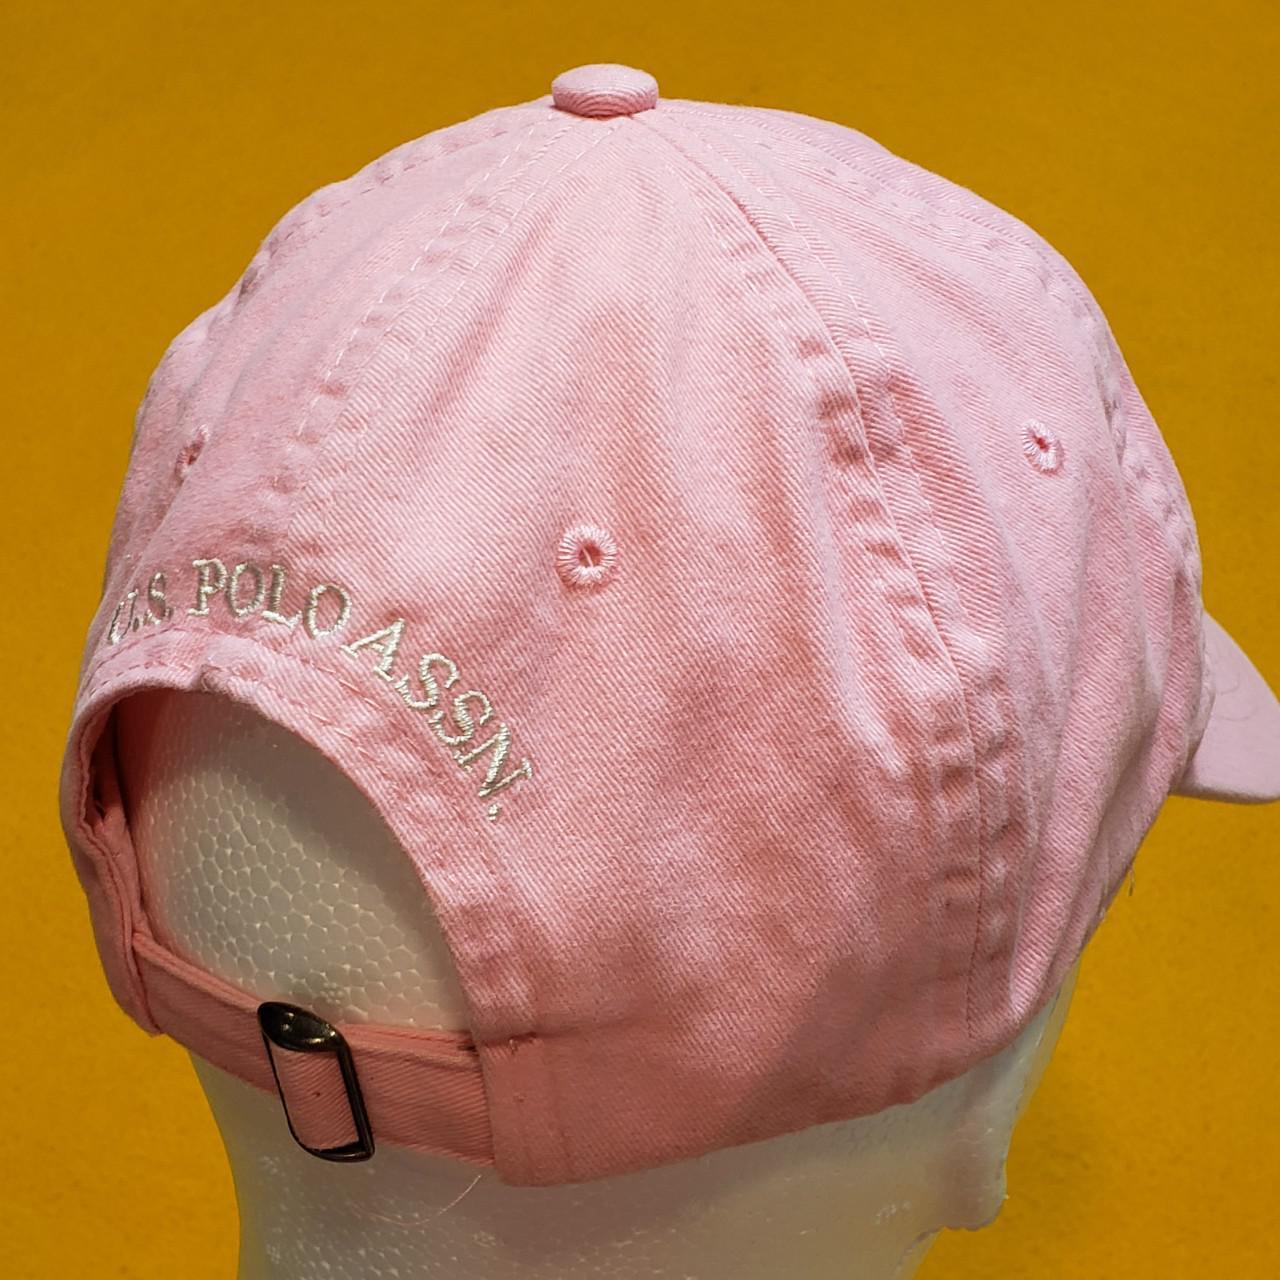 U.S. Polo Assn. Men's Pink and White Hat (2)